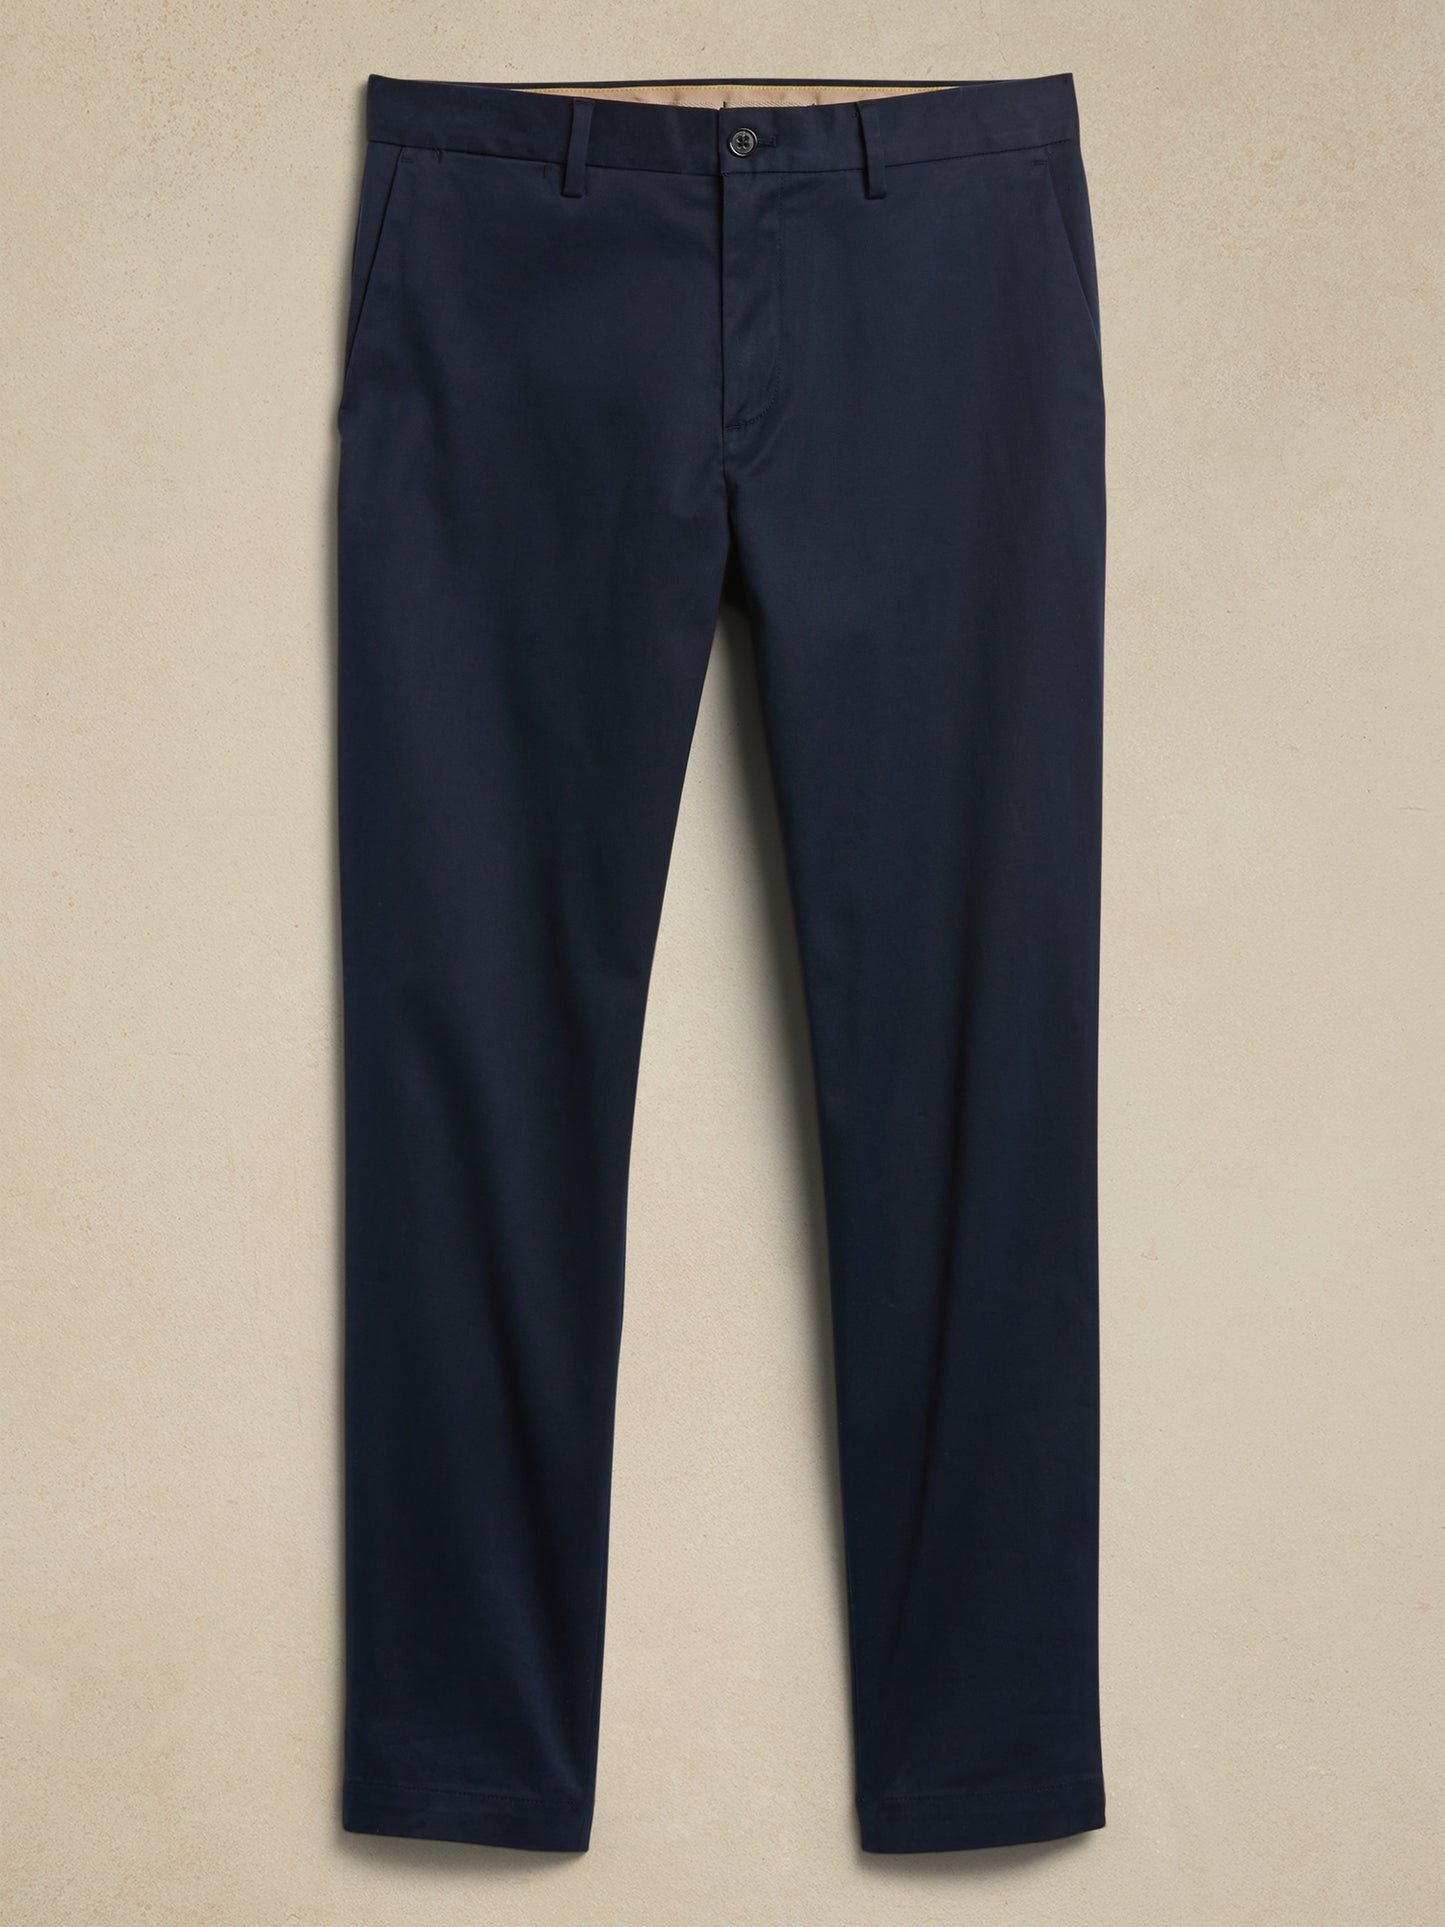 Athletic Tapered Rapid Movement Chino